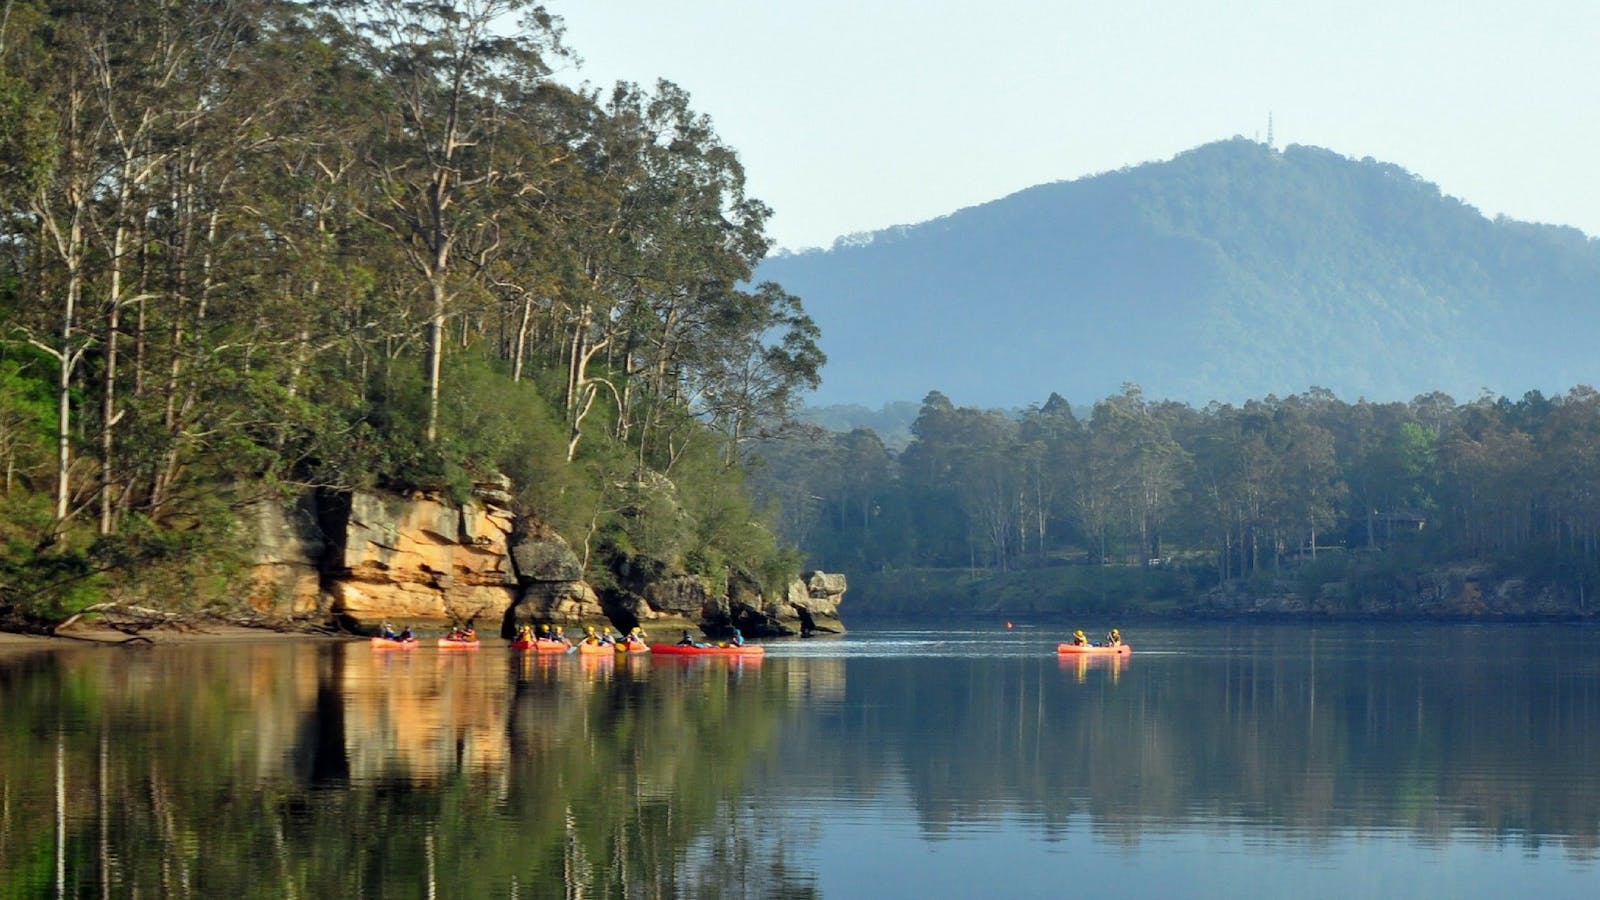 Paddle the Shoalhaven River on your own craft or hire one,  there's a lot of river to explore!